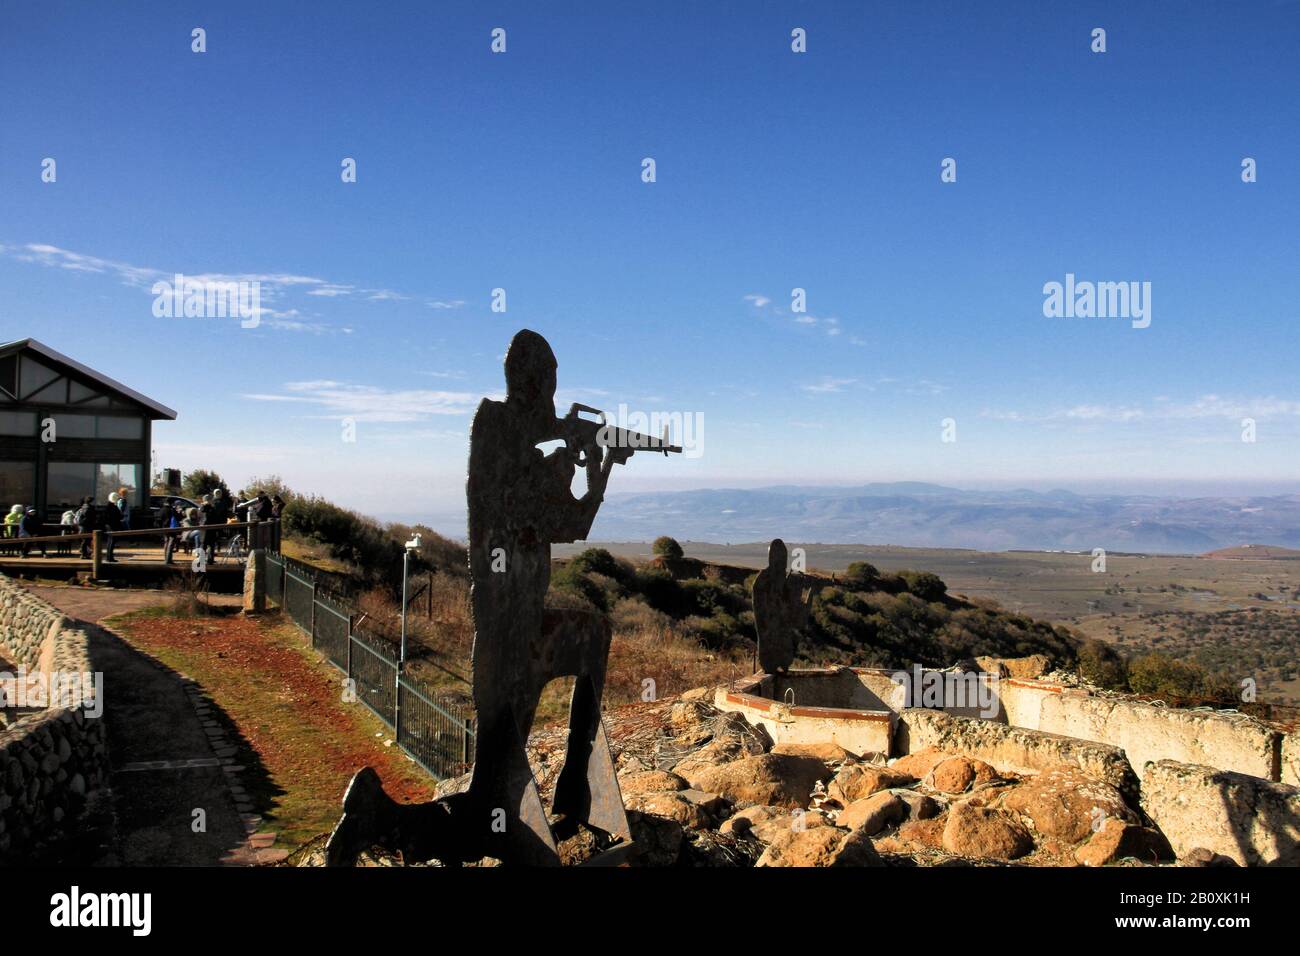 A metal soldier silhouette kneels near the trenches on top of Mount Bental in Israel's Golan Heights, with a view toward Kibbutz Merom Golan. Stock Photo